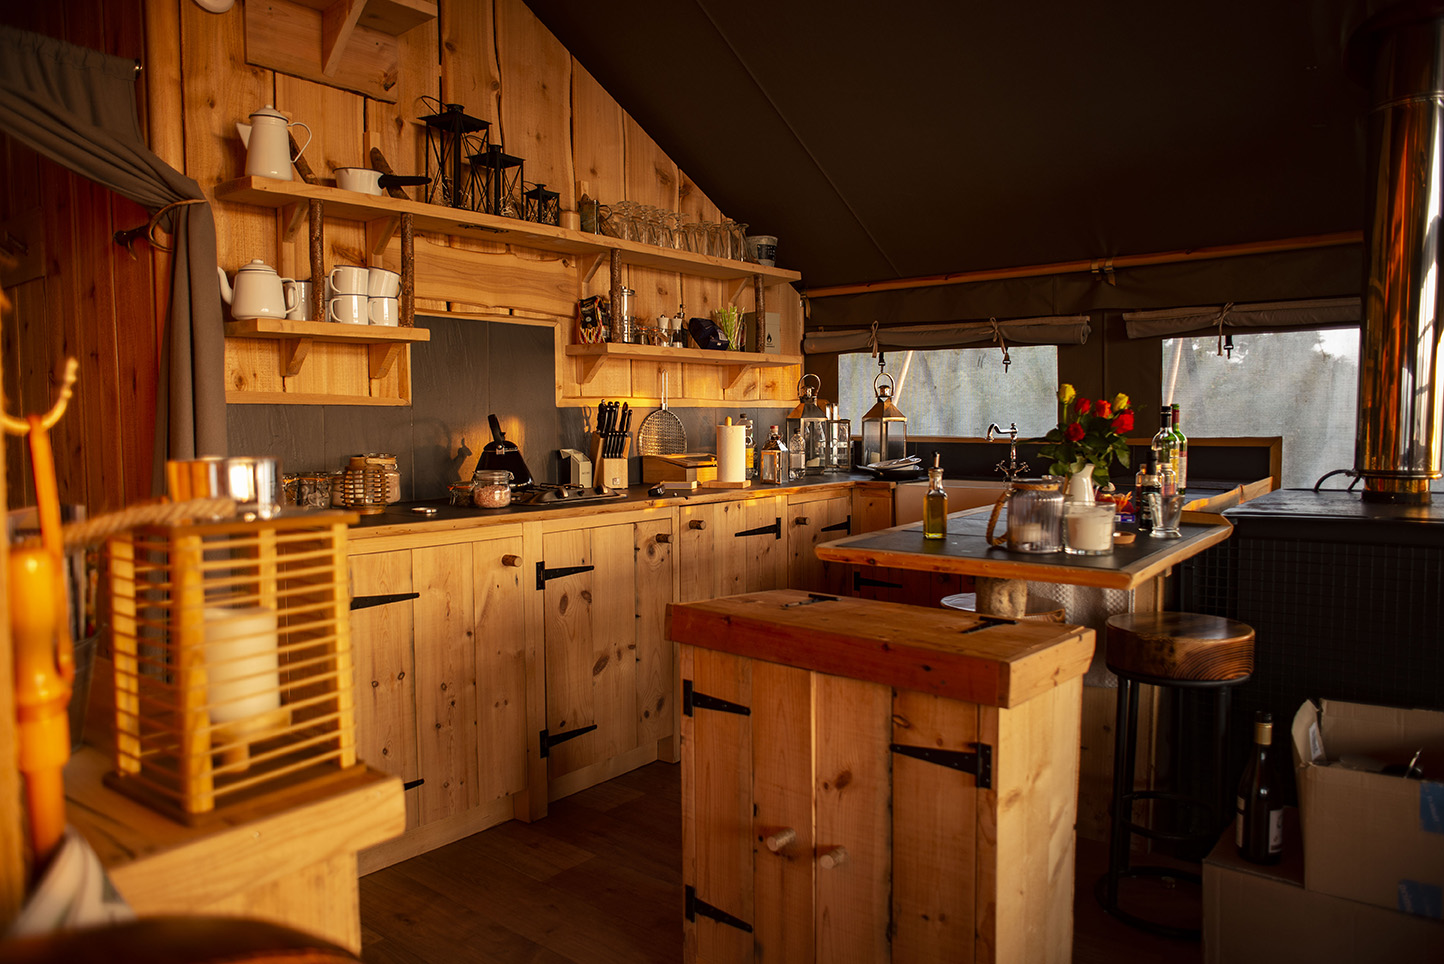 Picture of the kitchen in Glamping the Wight Way lodge near the river yar